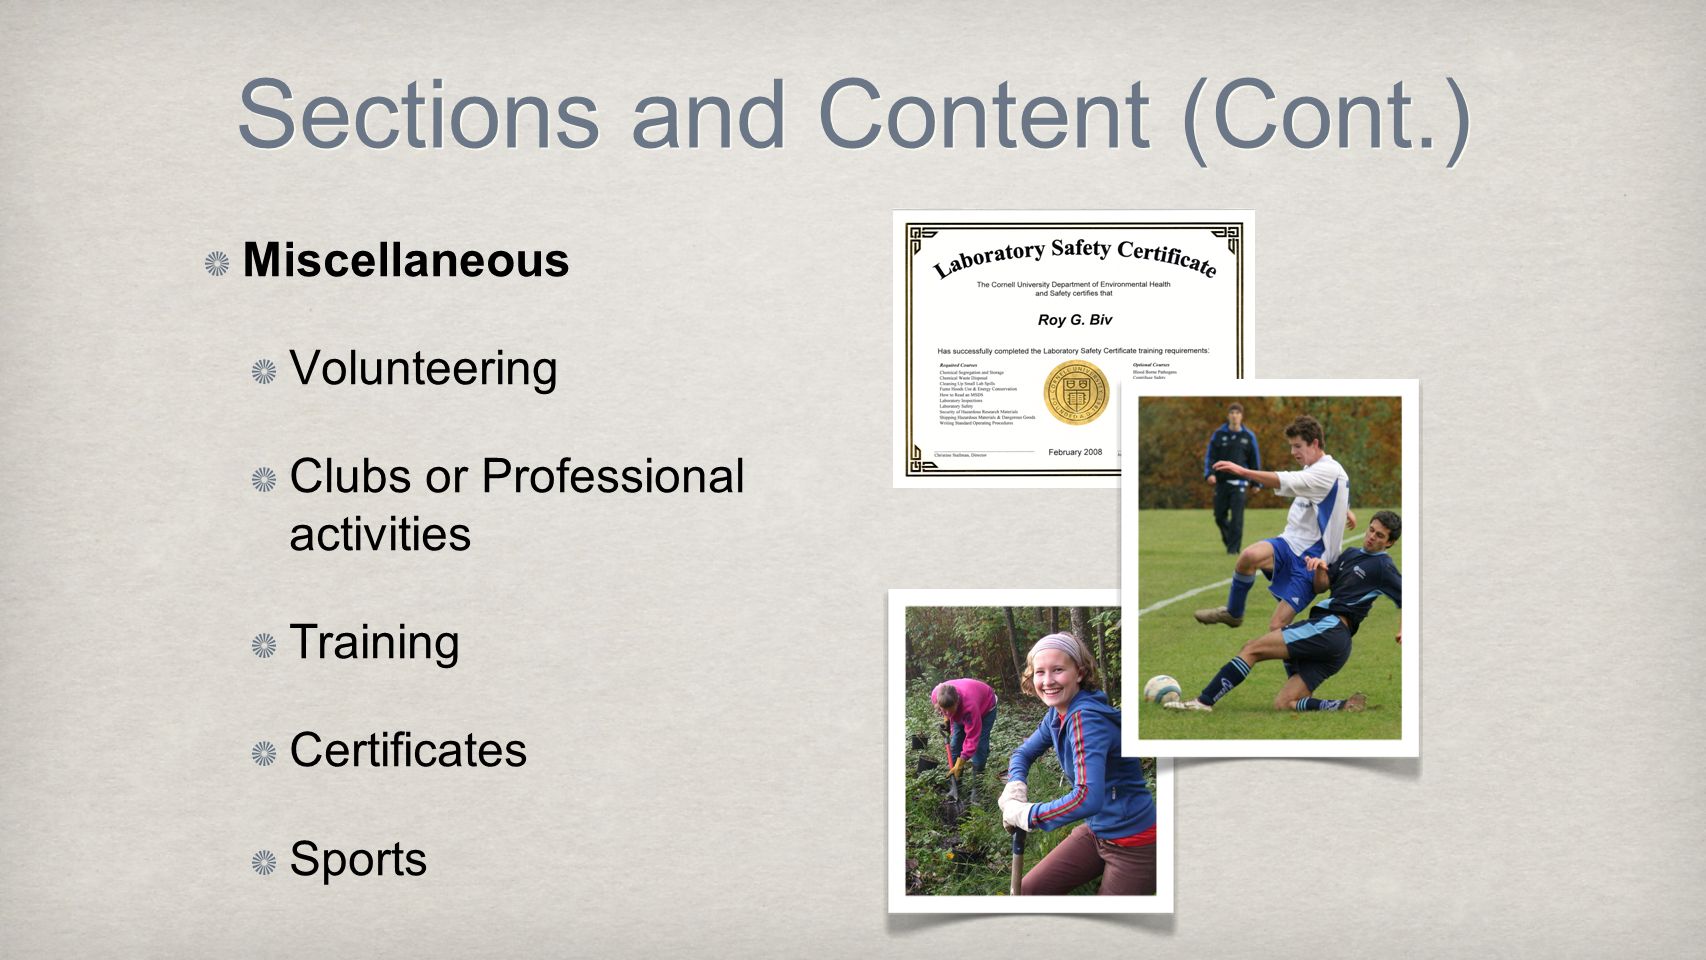 Sections and Content (Cont.) Miscellaneous Volunteering Clubs or Professional activities Training Certificates Sports